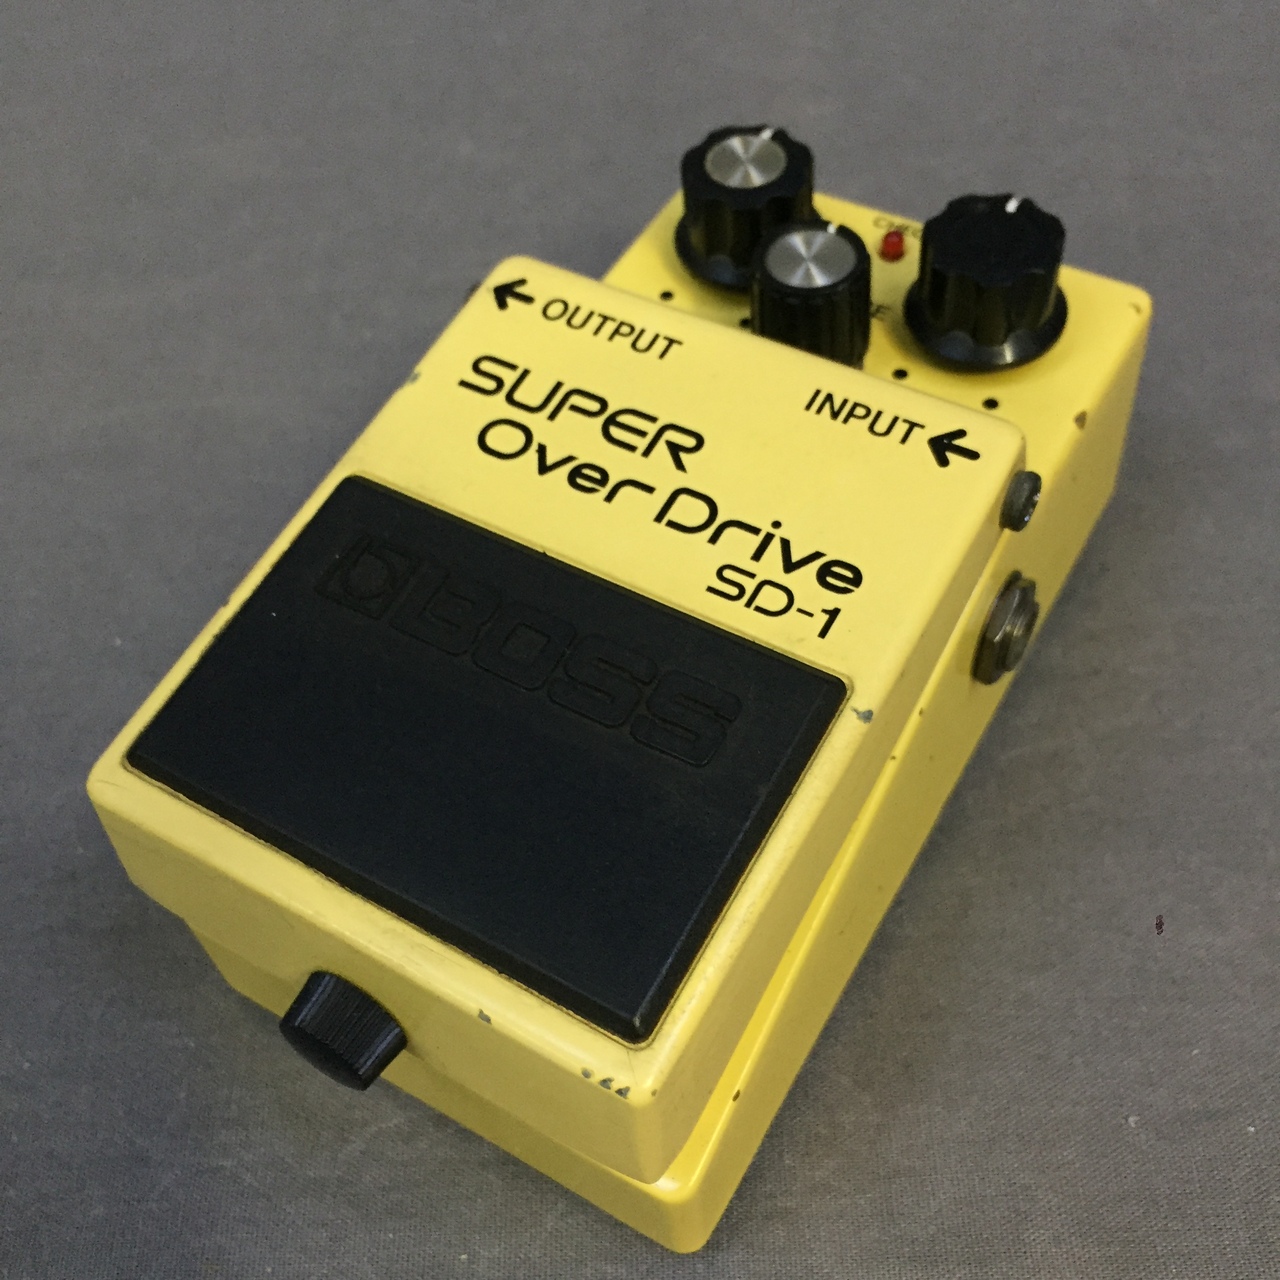 BOSS SD-1 Super OverDrive 1991年製 ACA MADE IN TAIWAN（中古